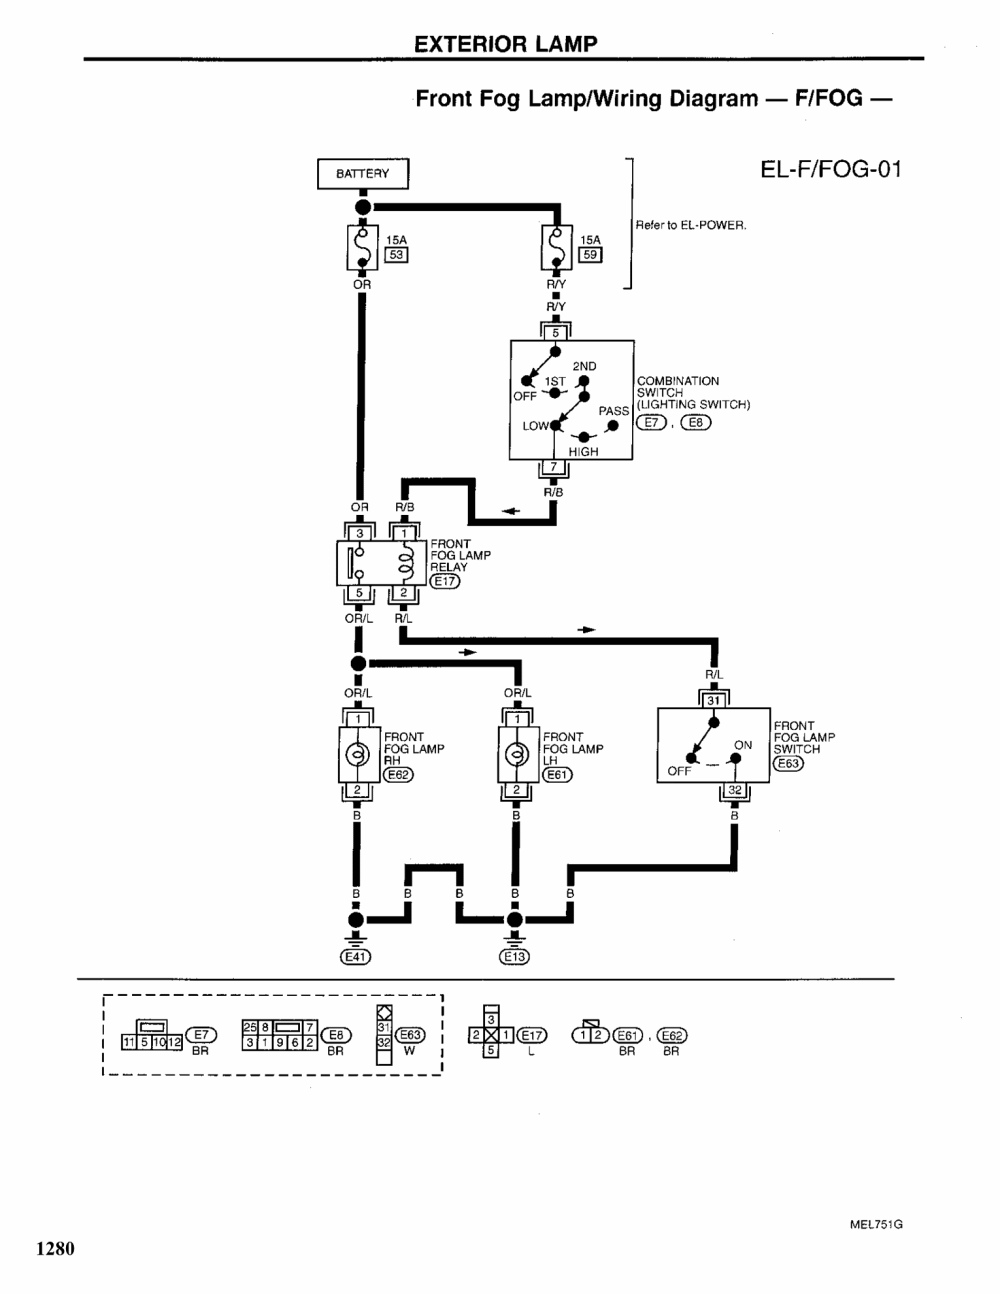 Wiring Diagram For Driving Lights - Electrical School